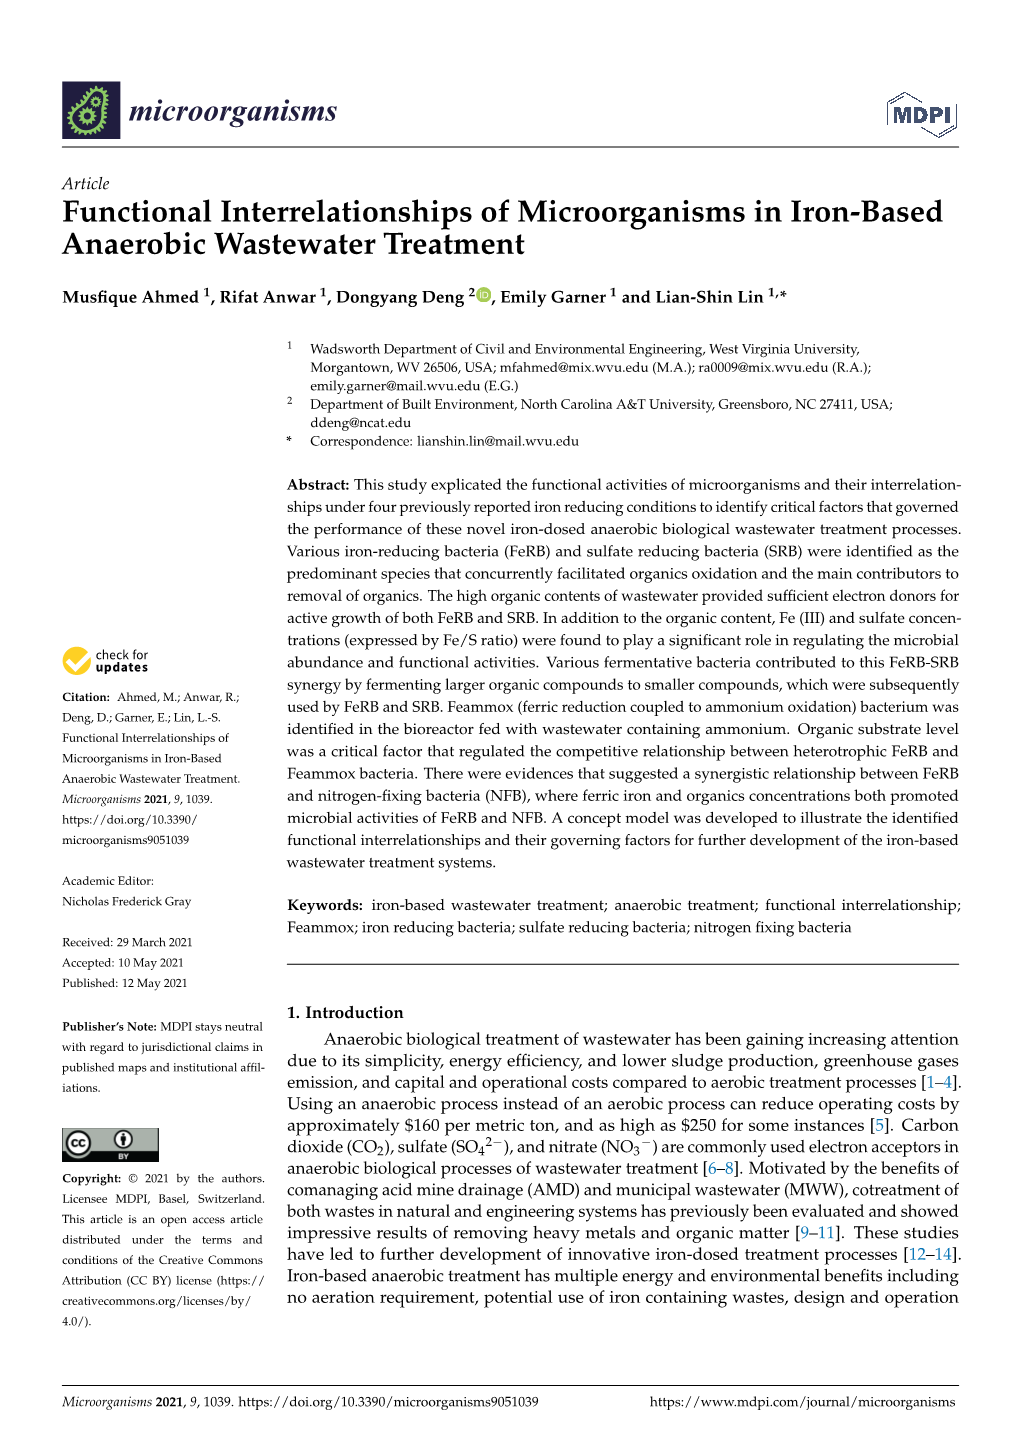 Functional Interrelationships of Microorganisms in Iron-Based Anaerobic Wastewater Treatment